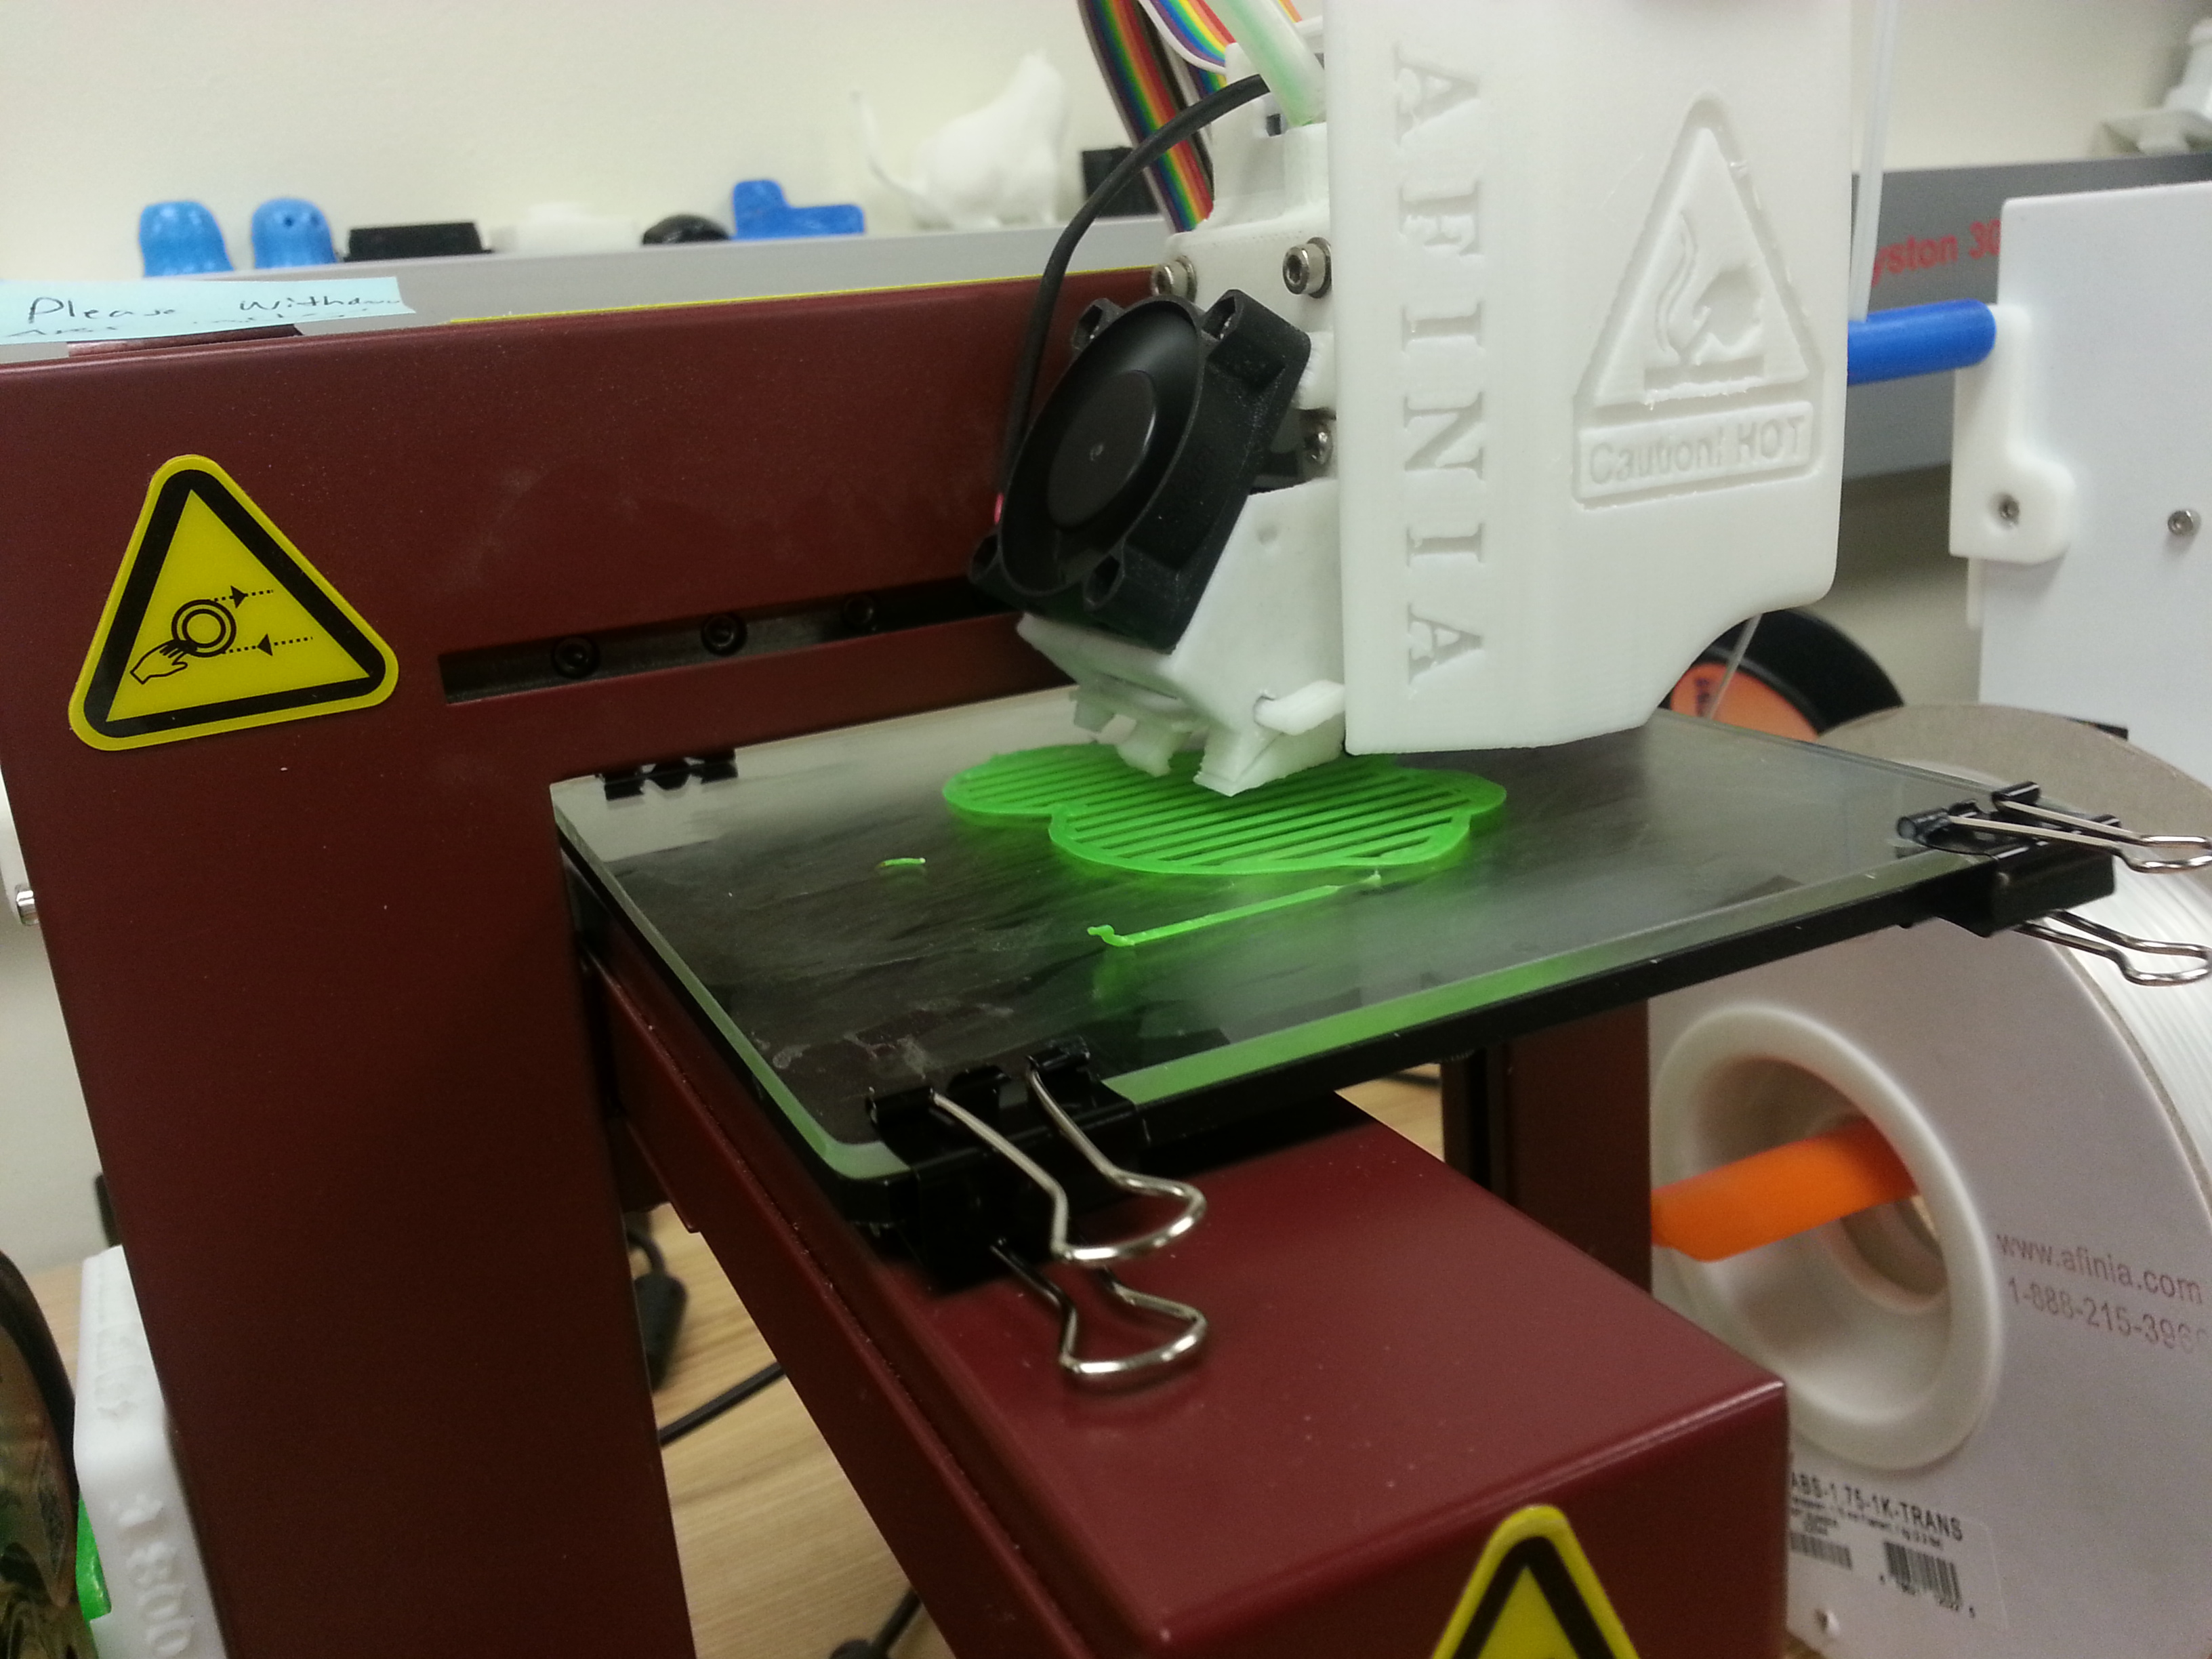 Printing the first turtle